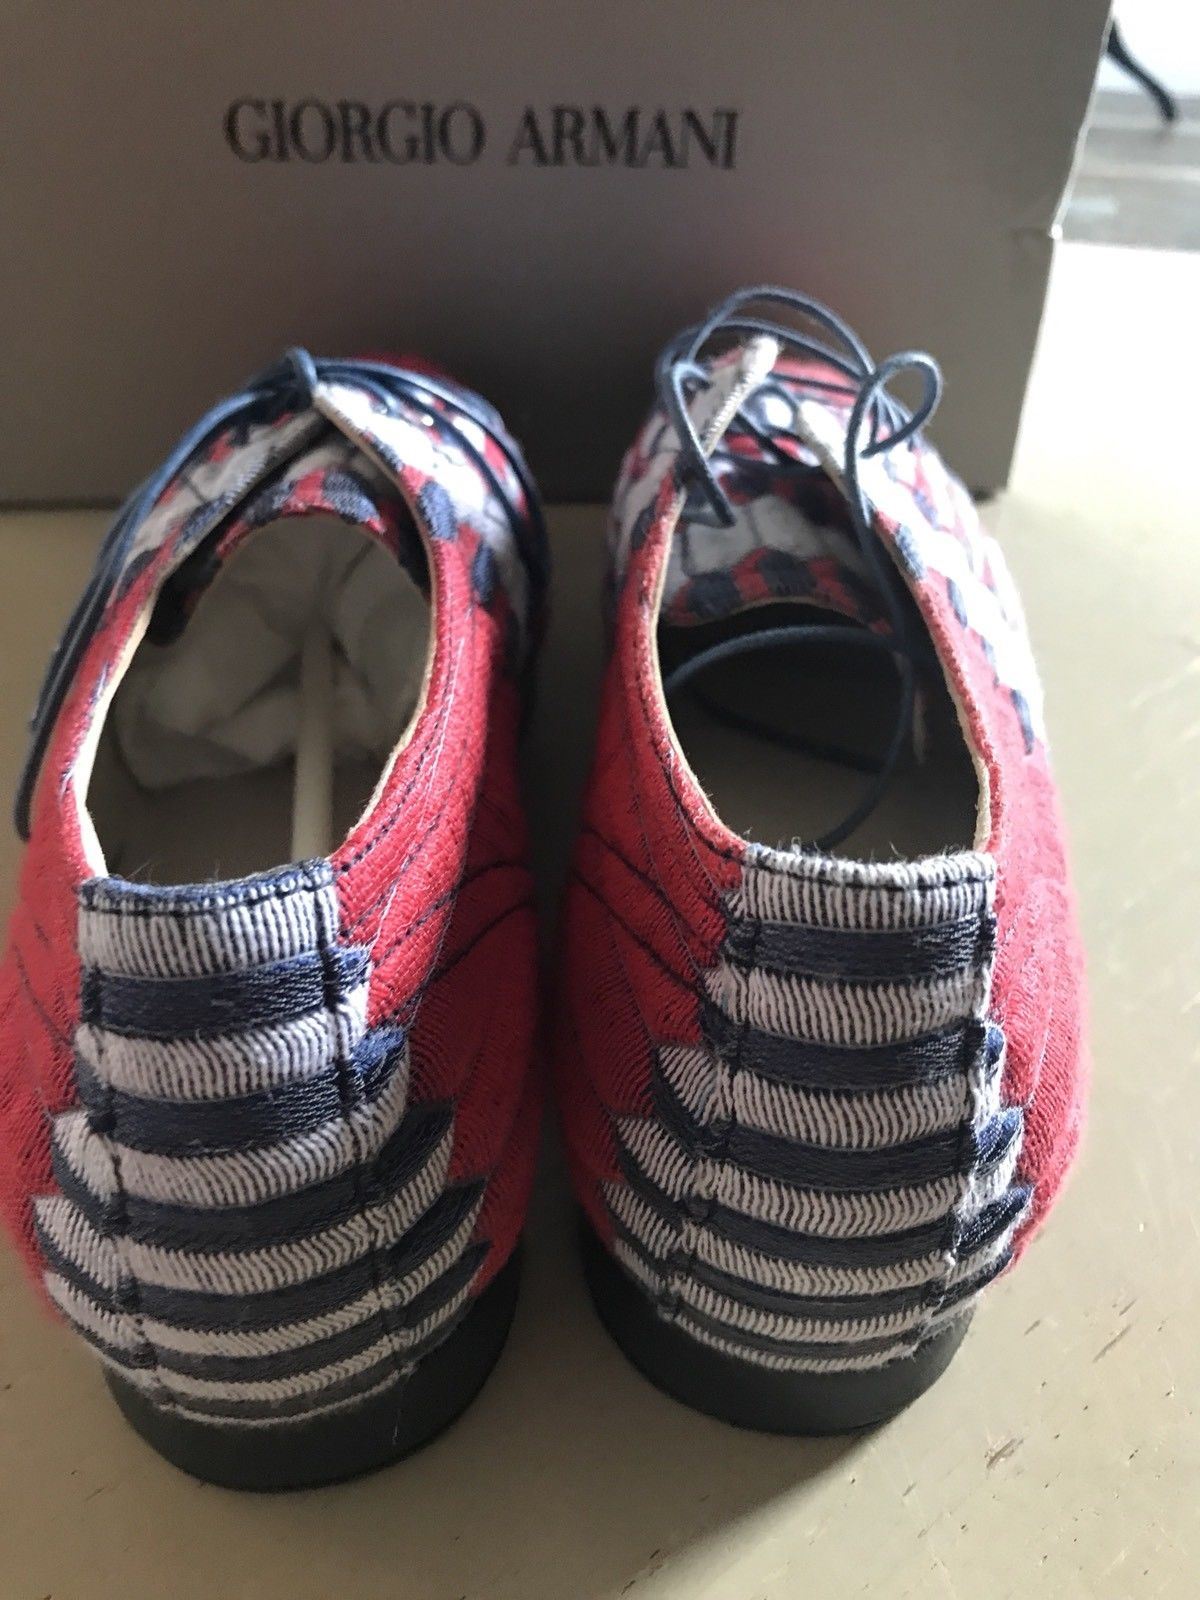 NIB $825 Giorgio Armani Women's  Flats Knight Shoes Sneakers Blue/Red 7.5 US - BAYSUPERSTORE